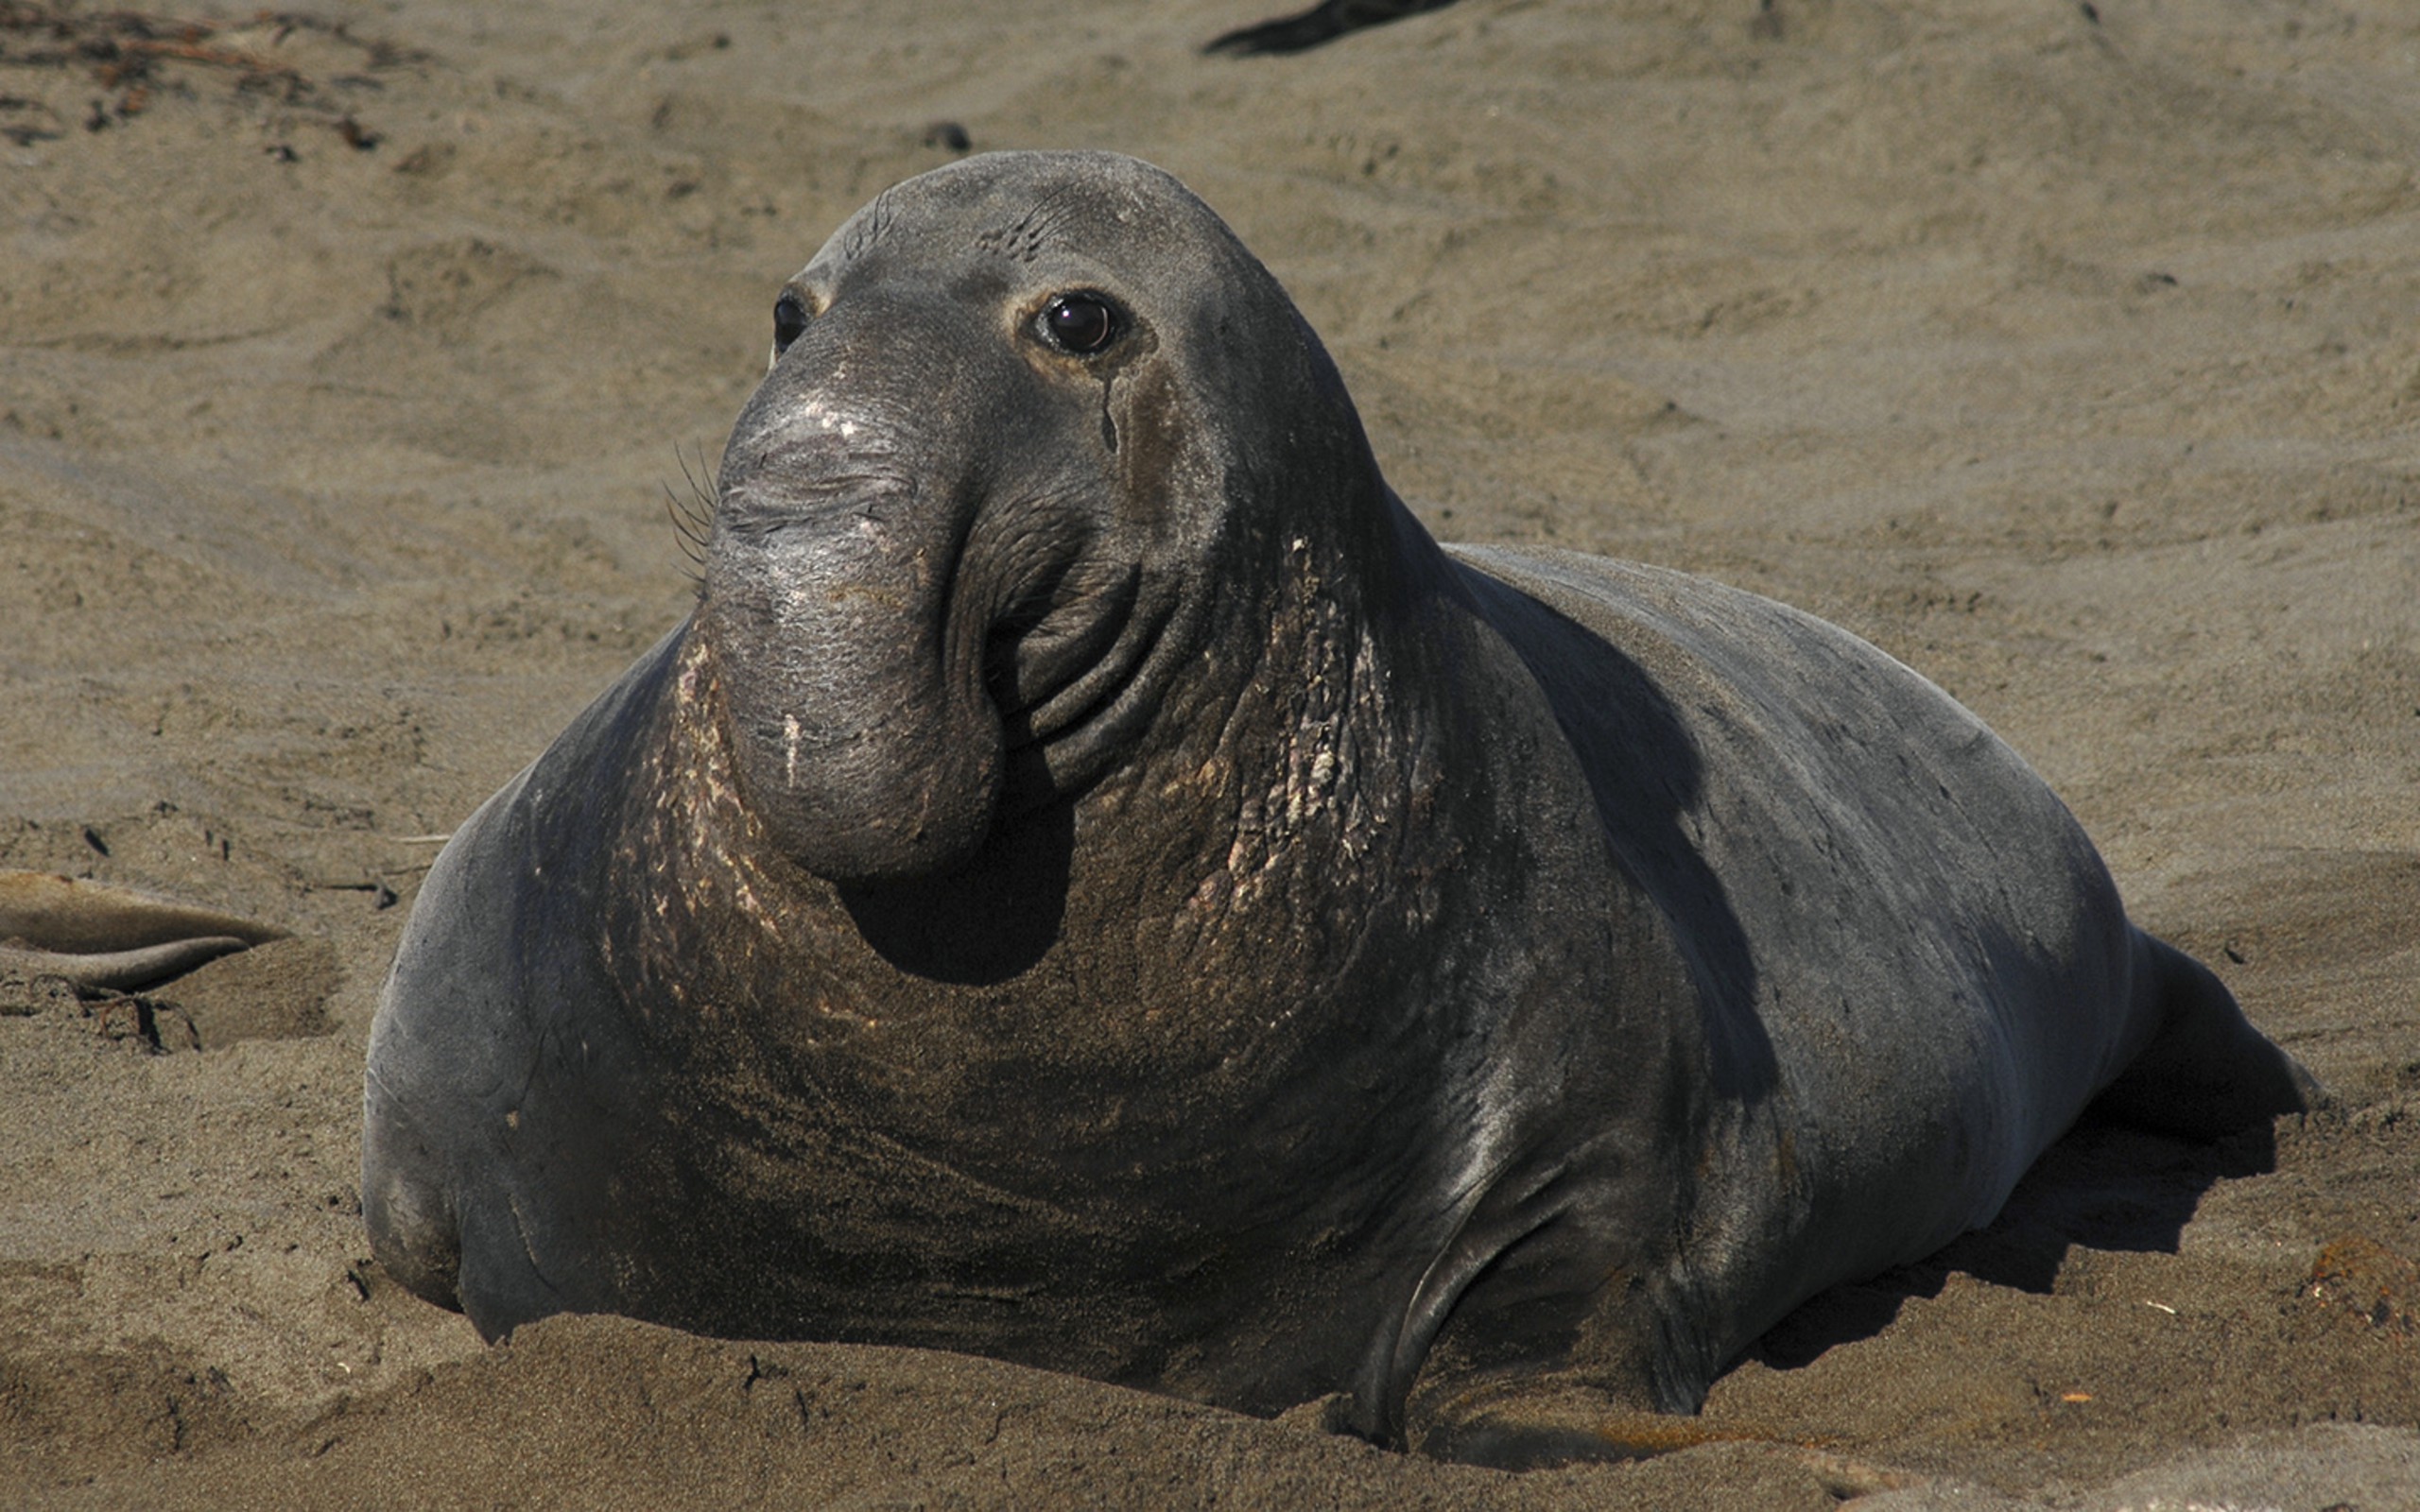 Elephant Seals Are Sneaky And Greedy But That's Why We Love Them